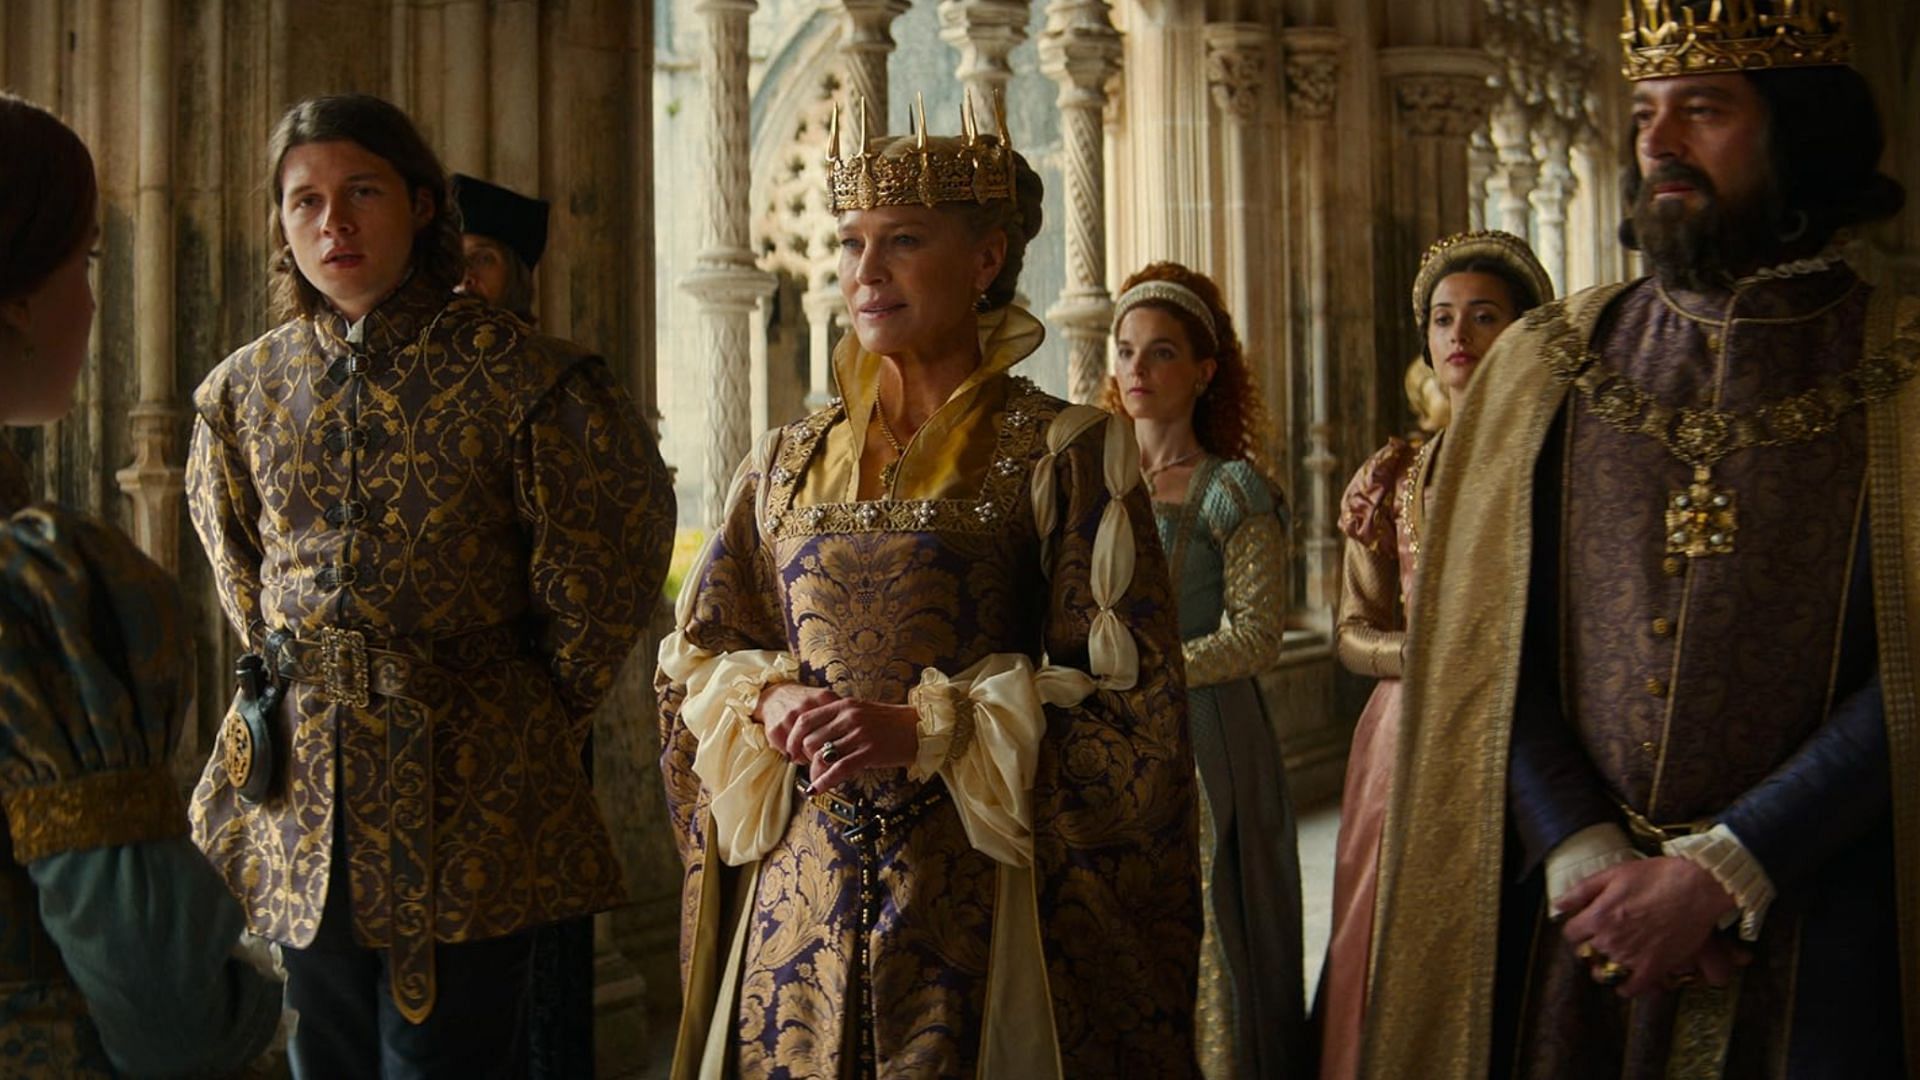 Robin Wright plays Queen Isabelle in the film (Image via Netflix)